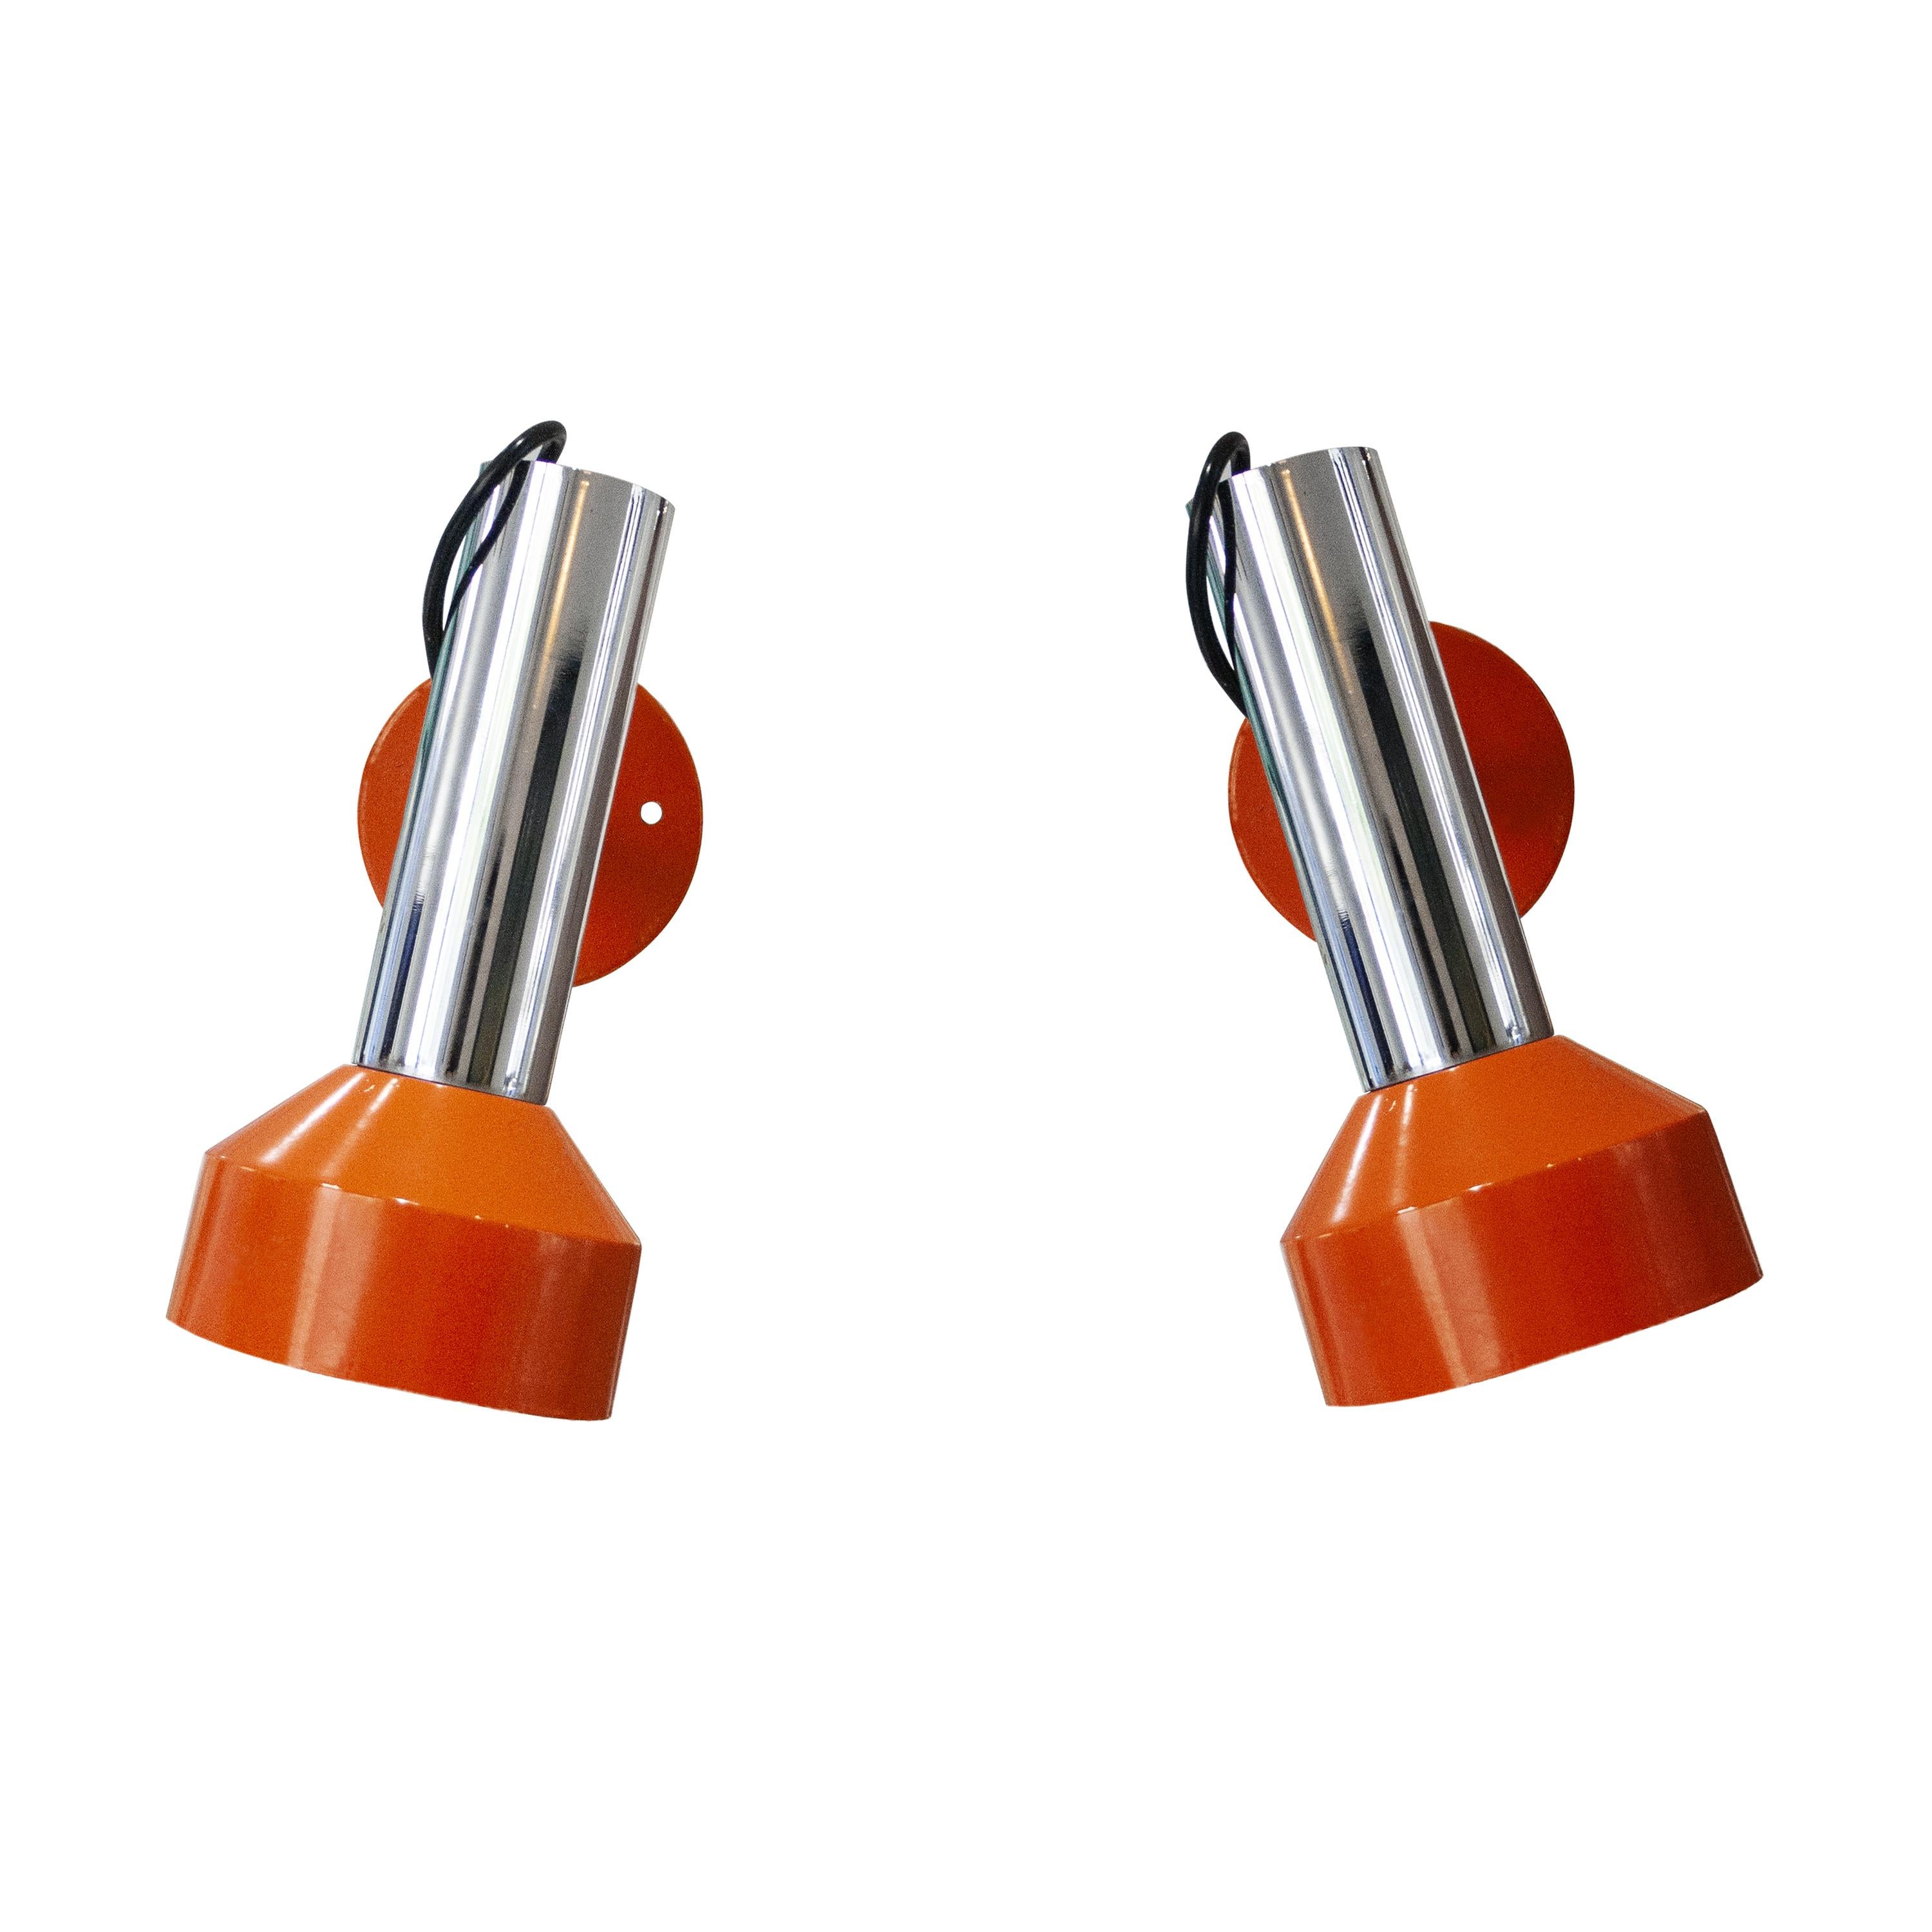  Pair of wall sconces made of chromed steel with orange lacquered details. Each one has a light point and its mobile structure allows different lighting positions and angles.